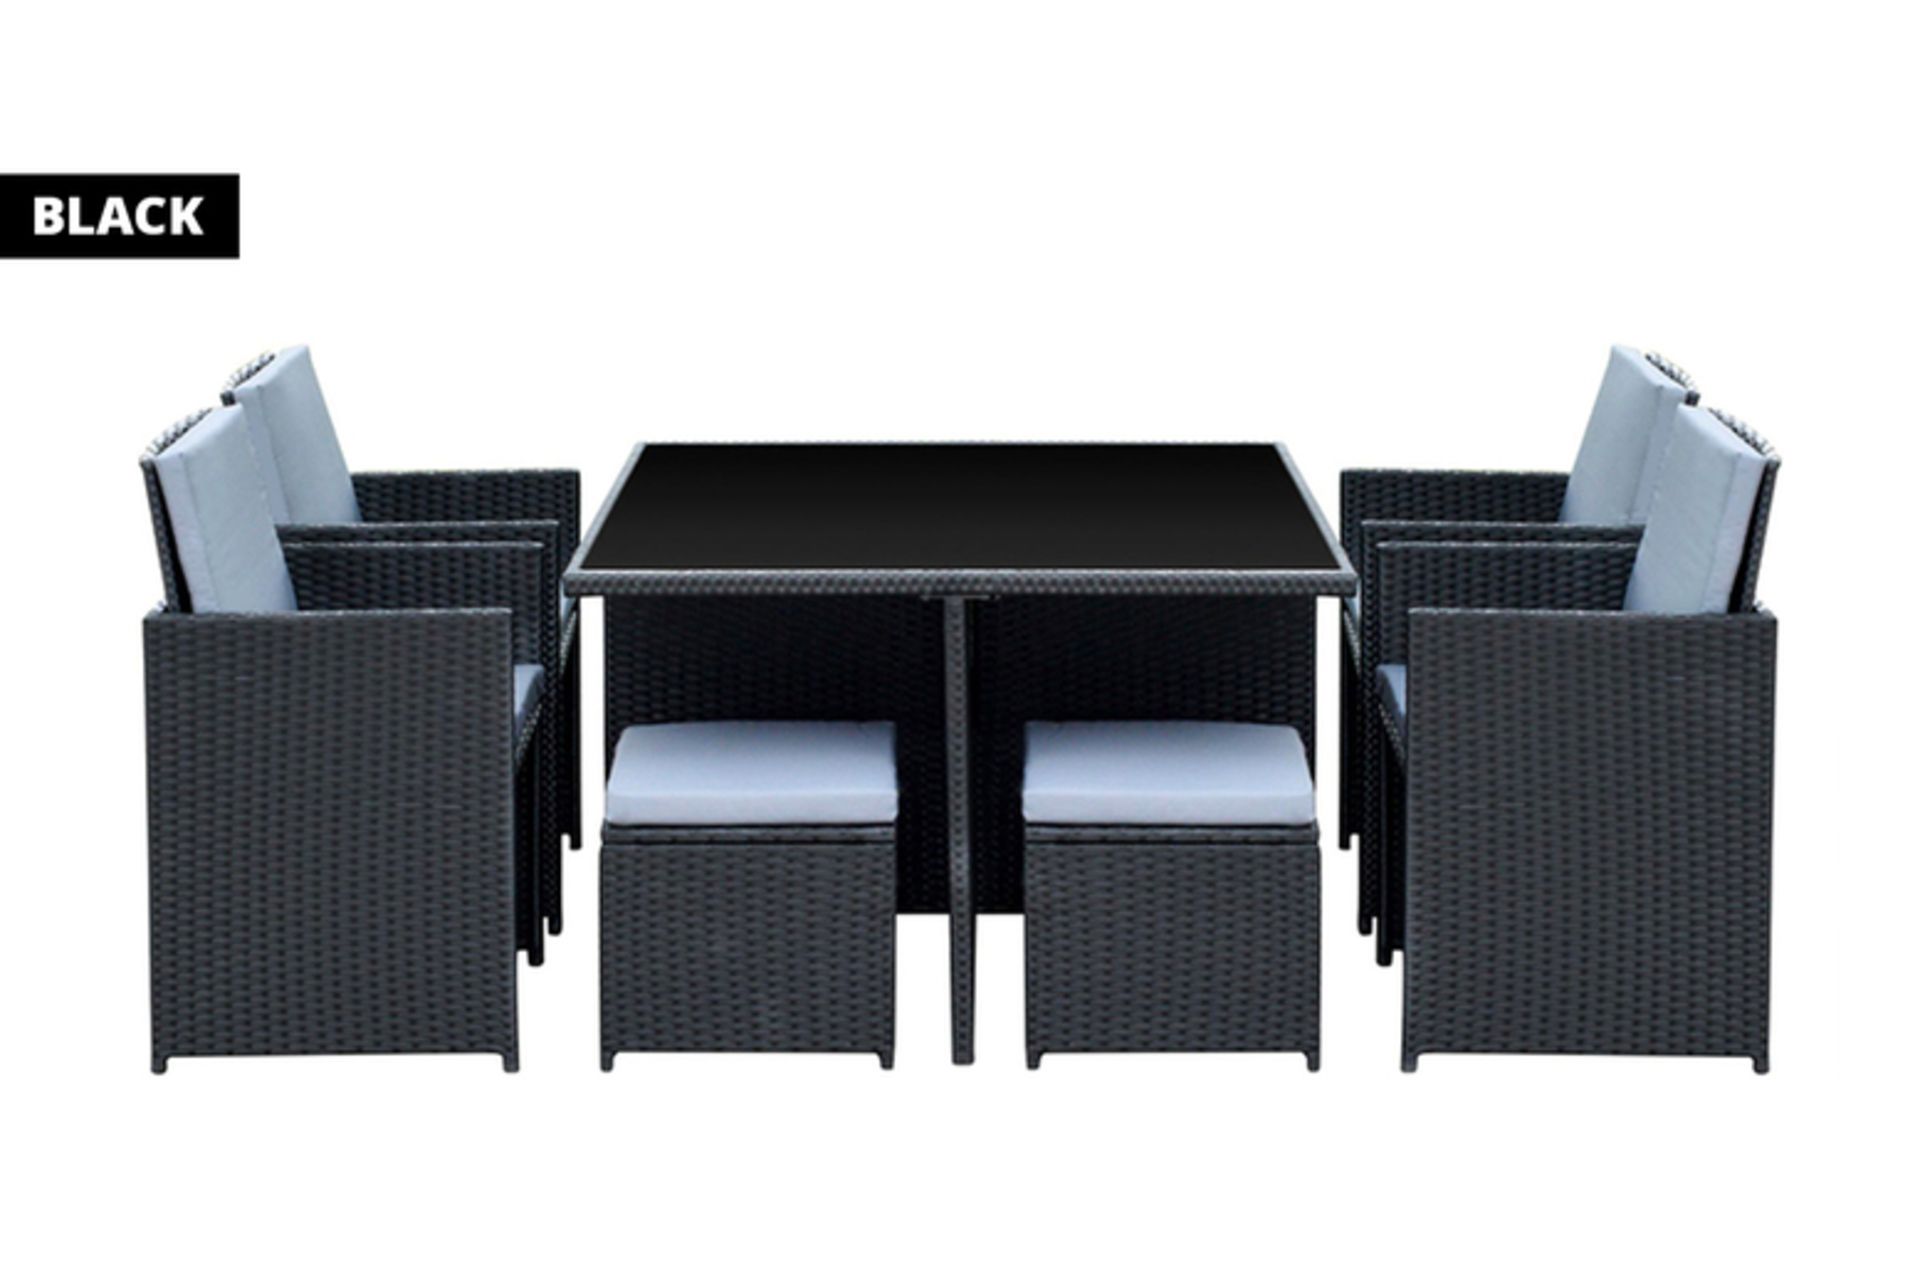 8-Seater Monument Rattan Cube Garden Furniture Dining Set - Black - Image 2 of 4